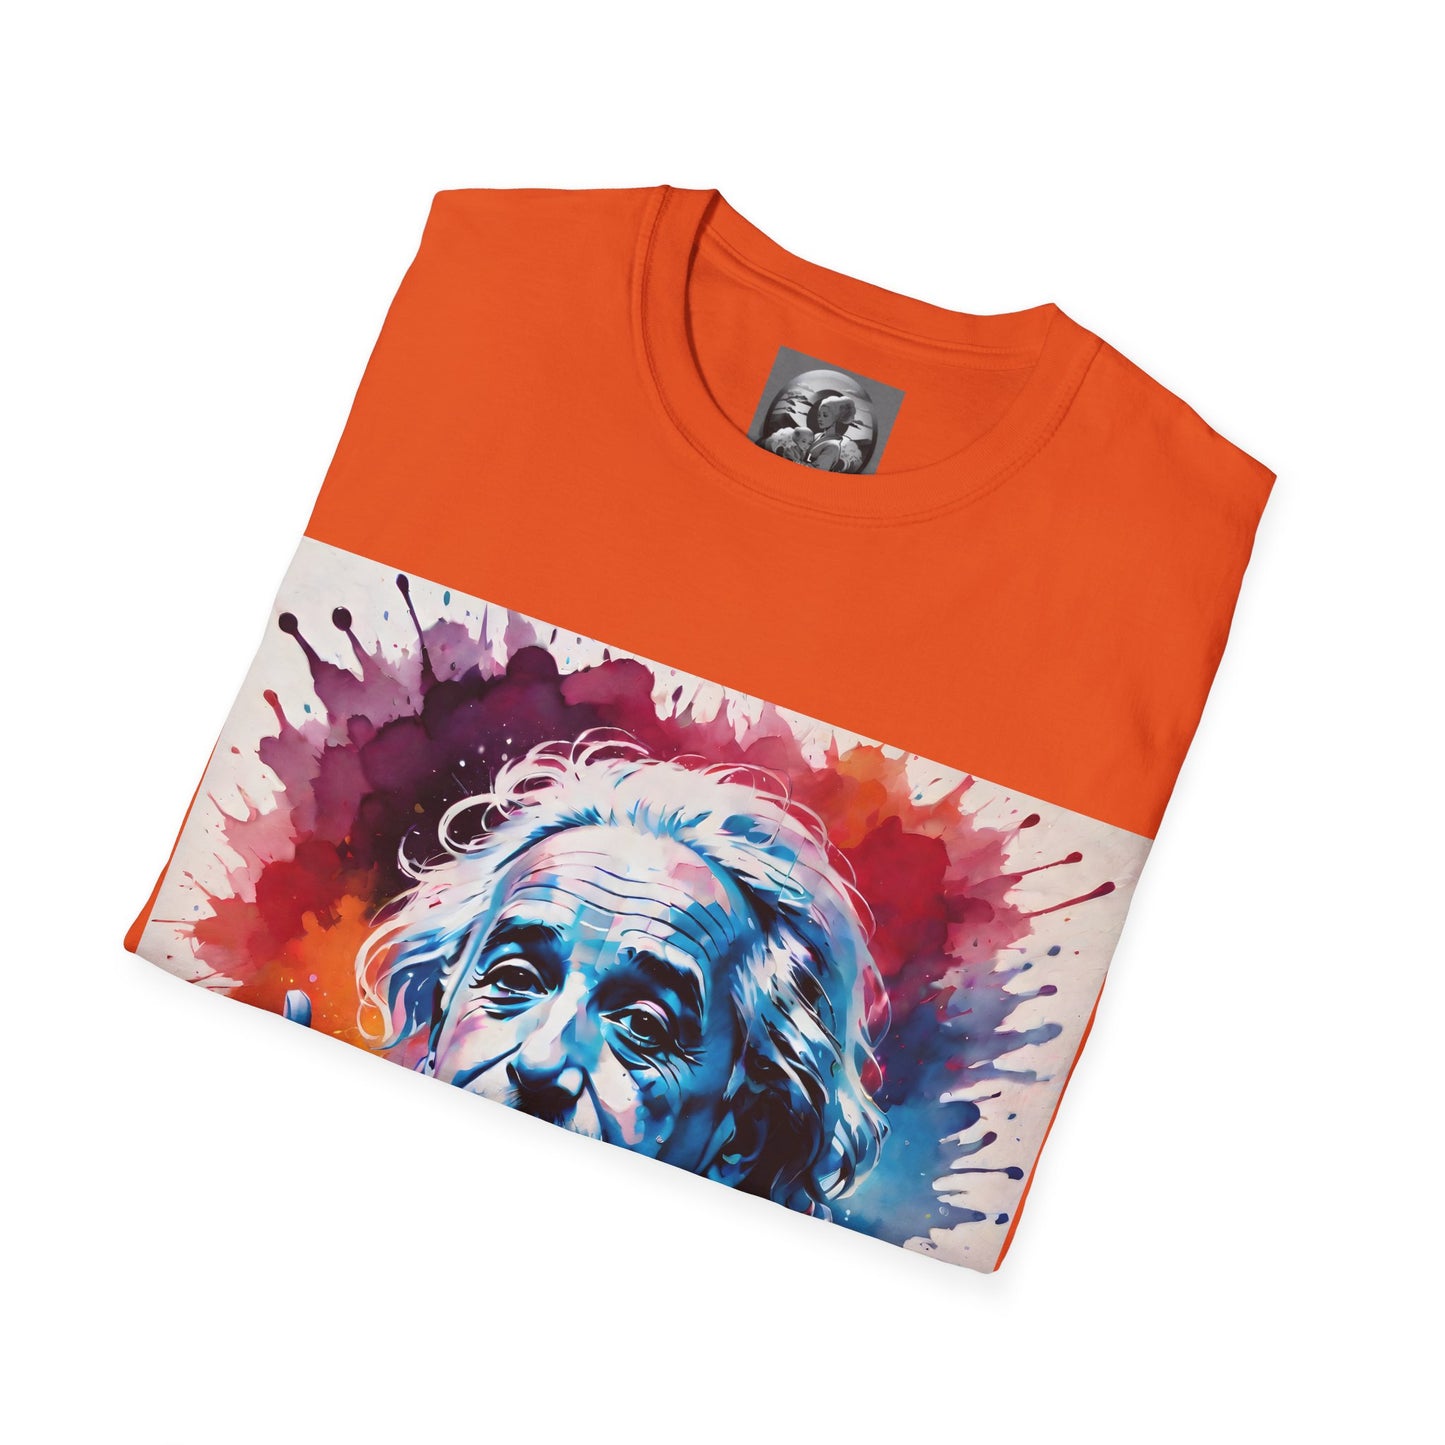 "The theory of everything" Single Print Unisex Softstyle T-Shirt